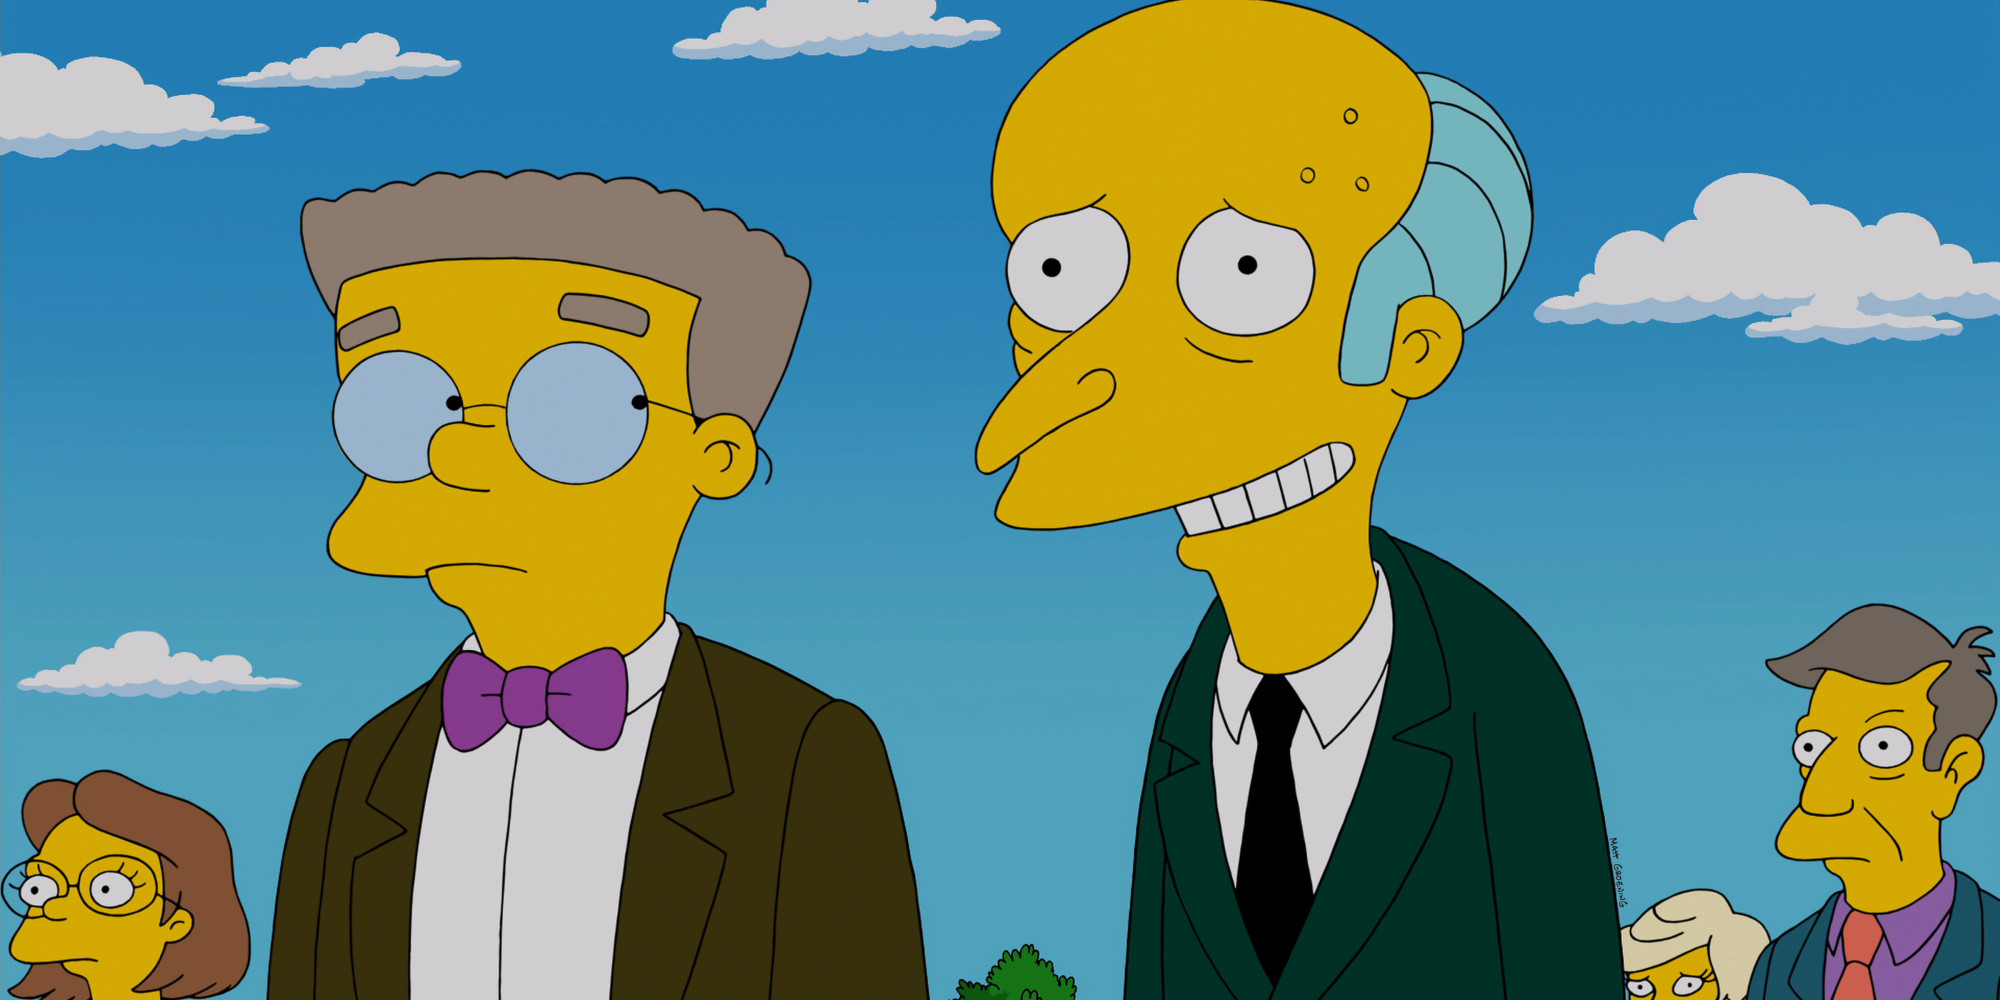 The Simpsons Smithers To Finally Come Out As Gay To Mr Burns In 